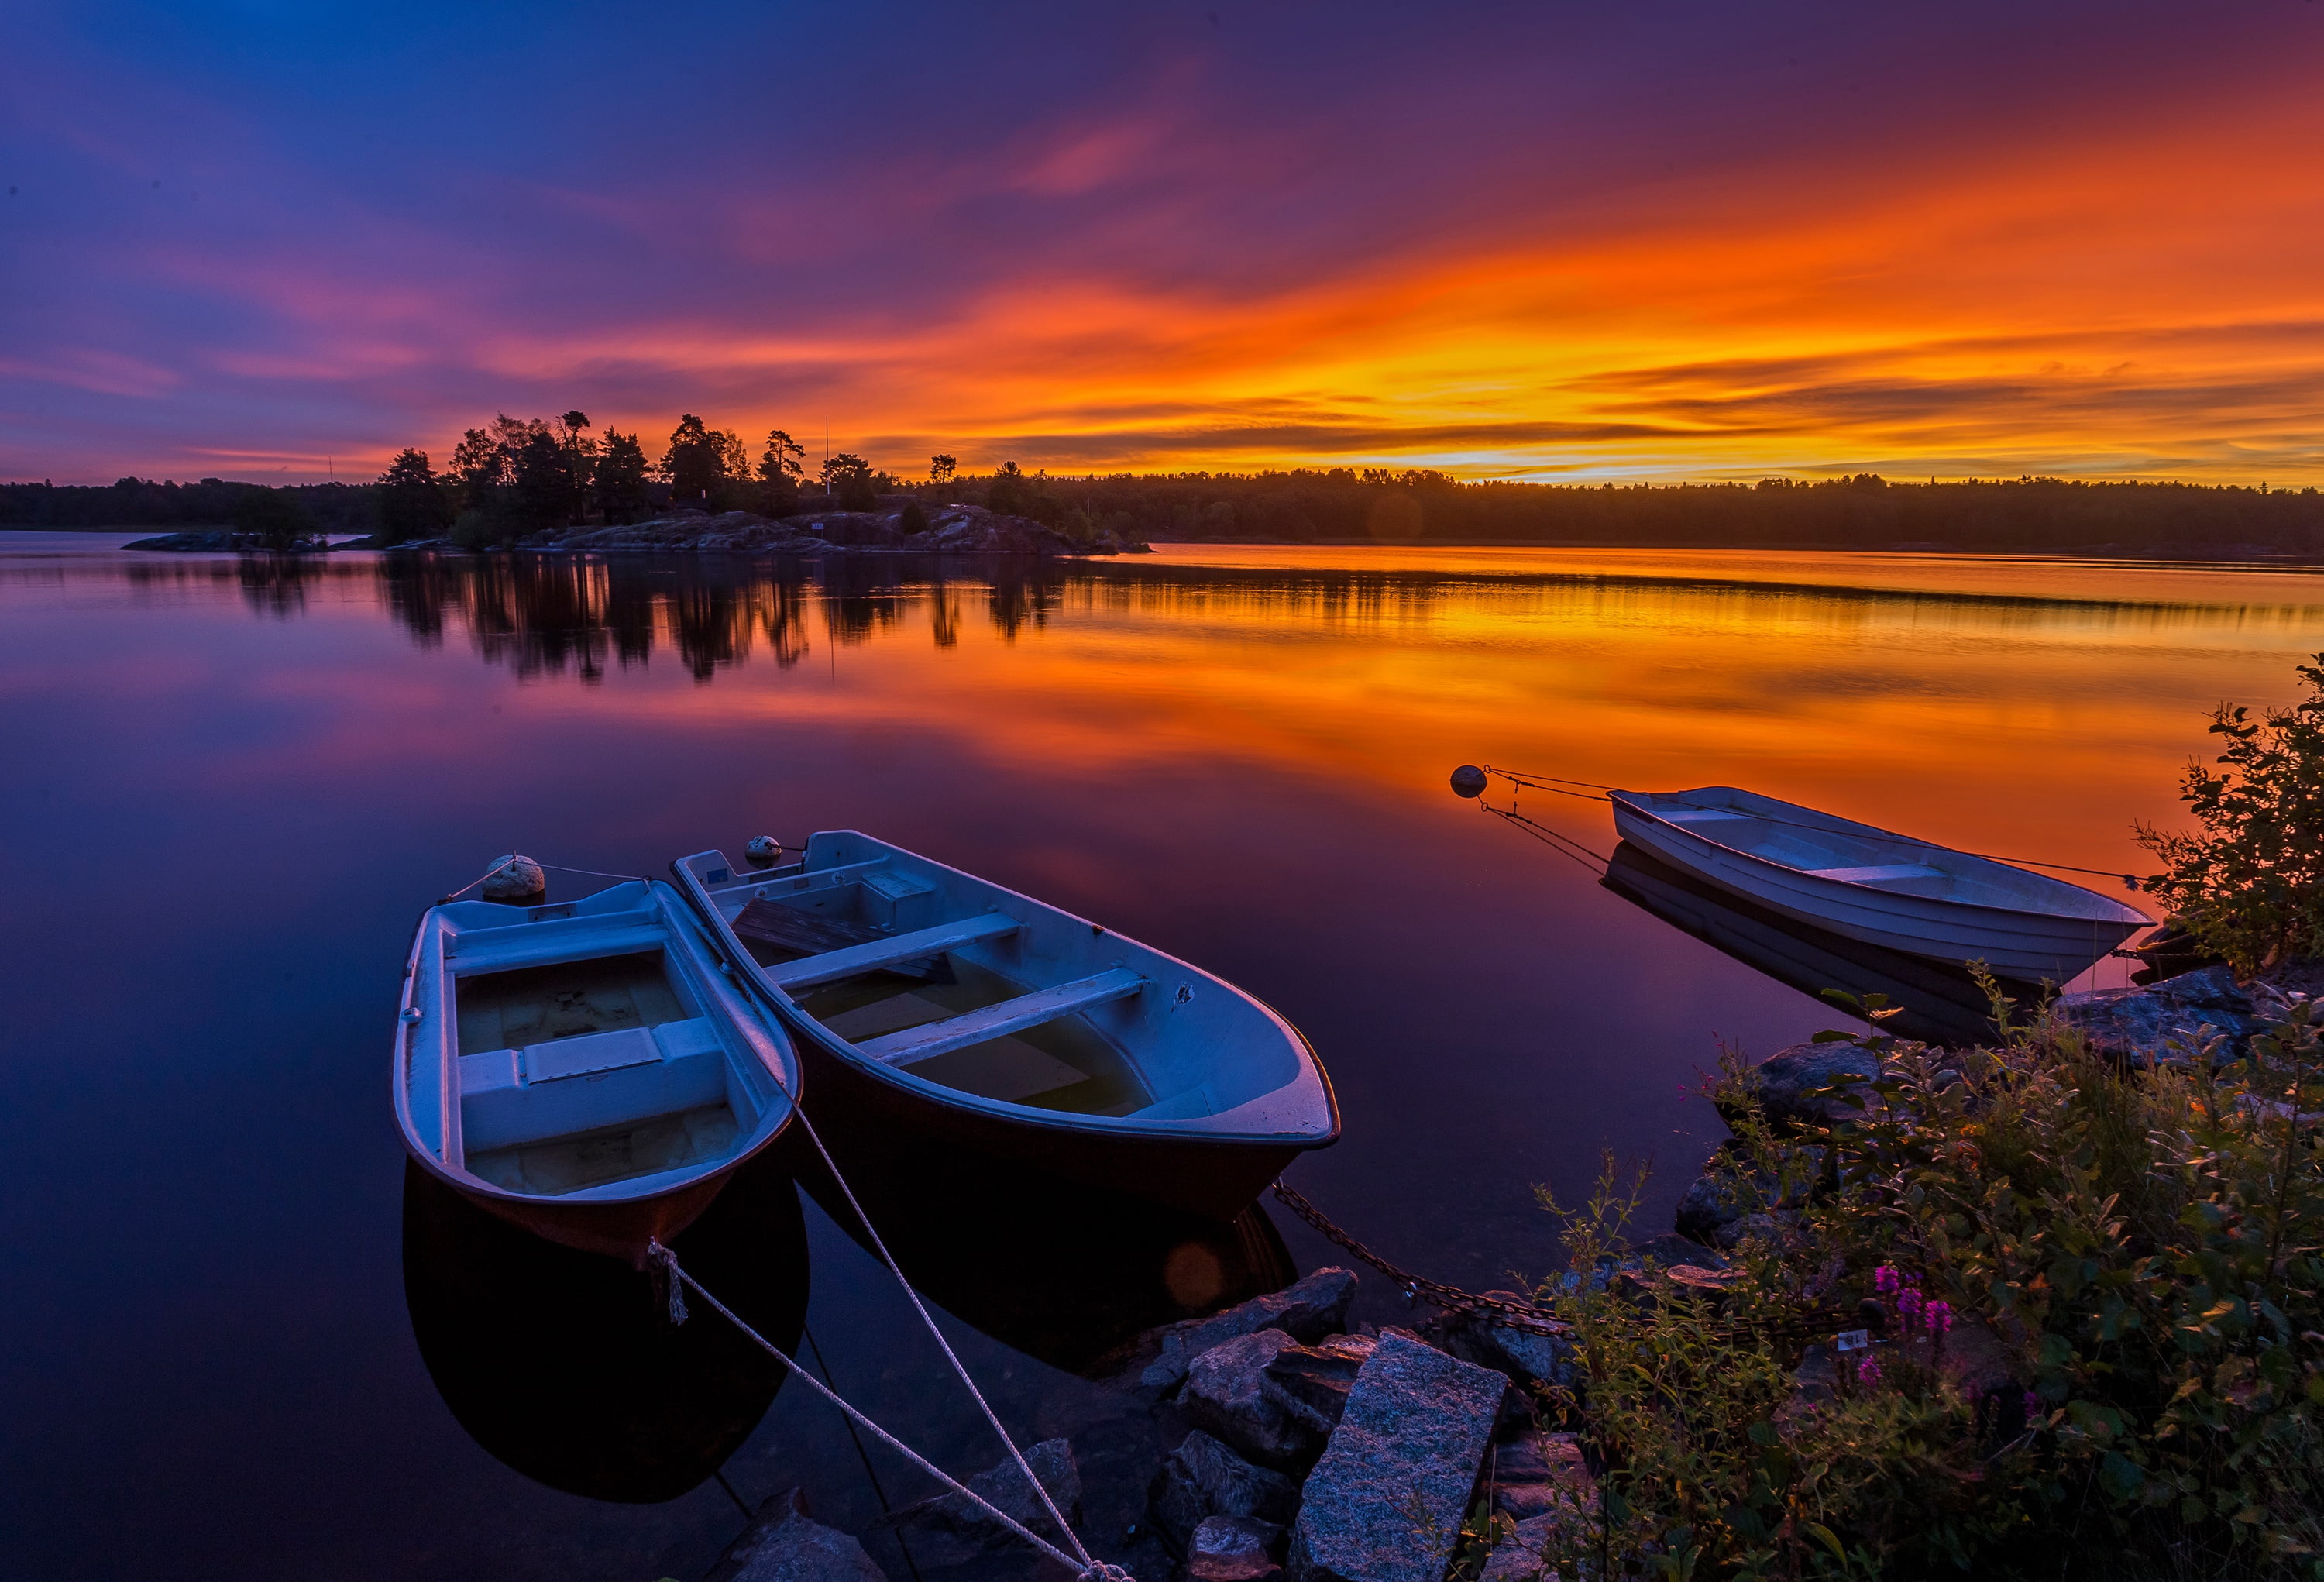 three white dinghy boats, forest, the sky, sunset, river, stones